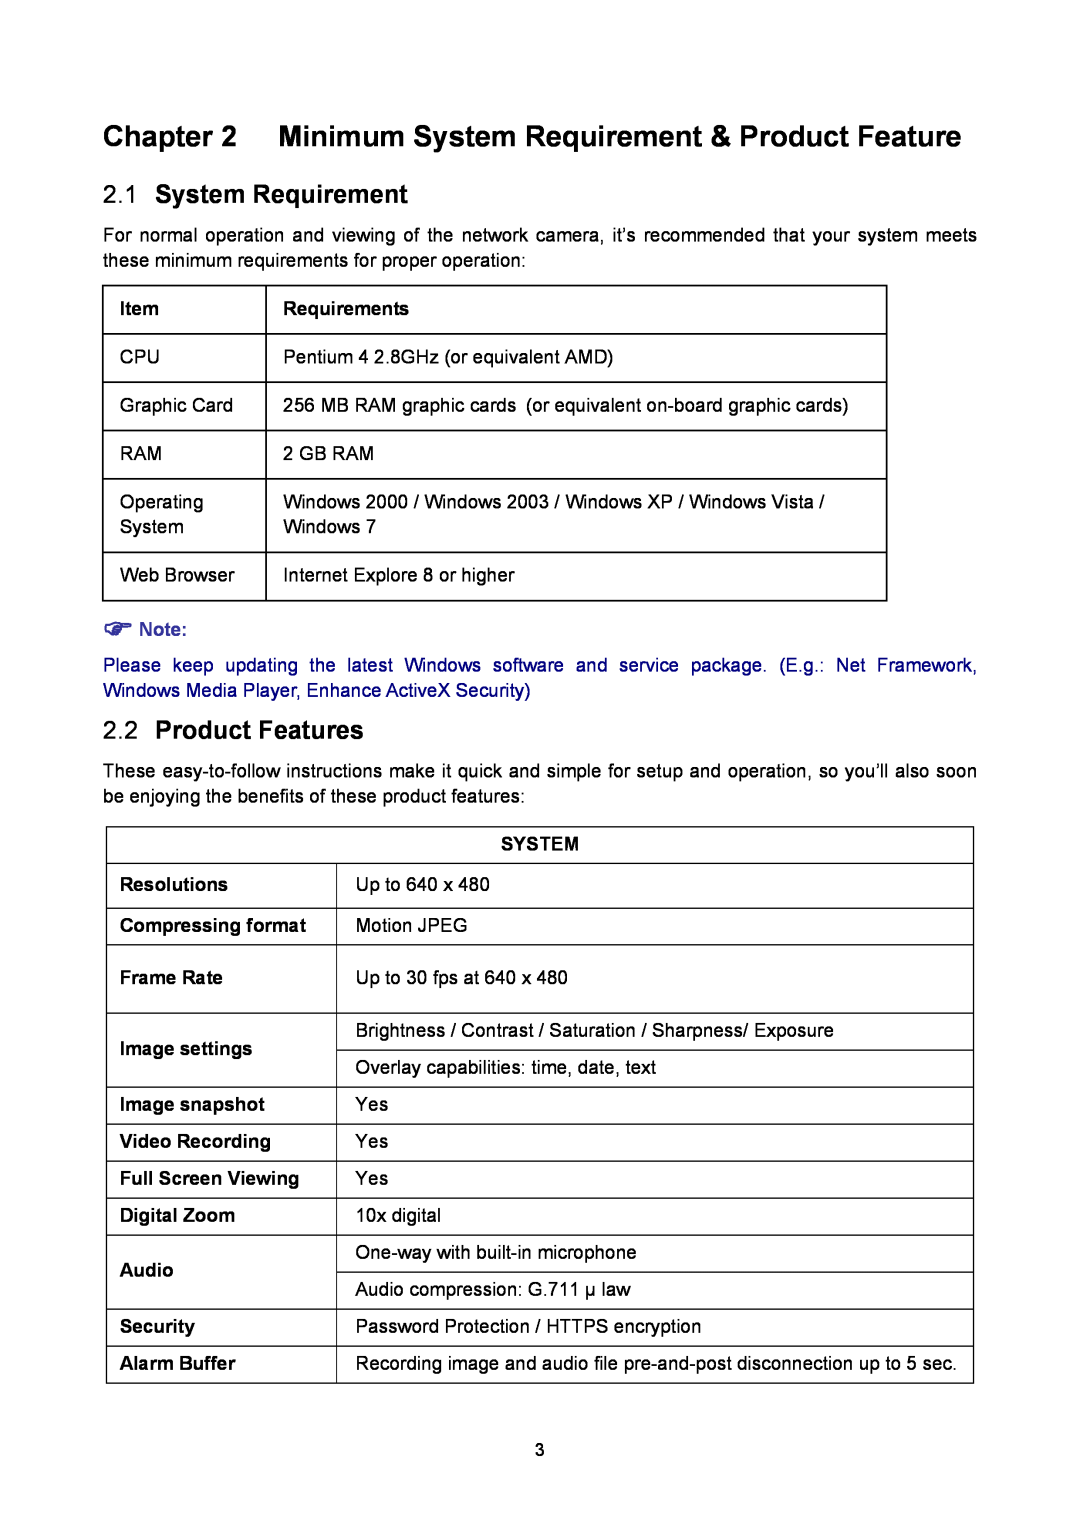 TP-Link TL-SC2020 manual Minimum System Requirement & Product Feature, Product Features,  Note 